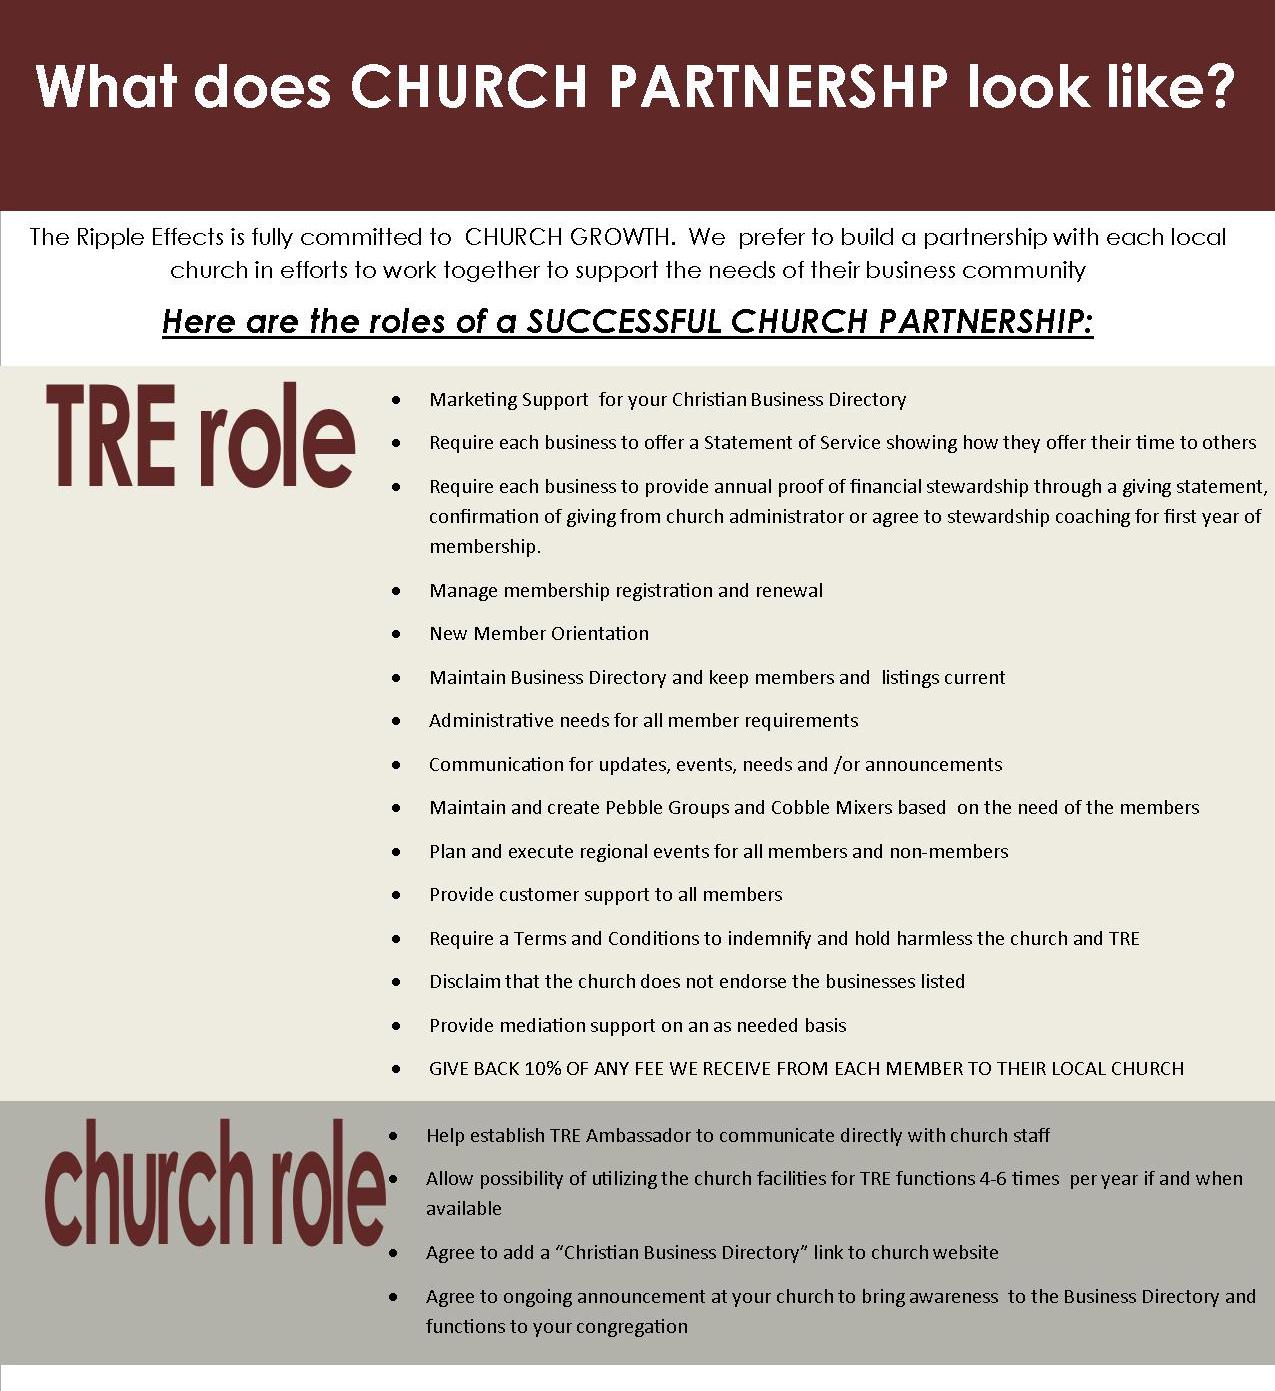 The Ripple Effects is fully committed to the ultimate goal of CHURCH GROWTH. Our business ministry prefers to build a partnership with each local church in efforts to work together to support the needs of their business community.